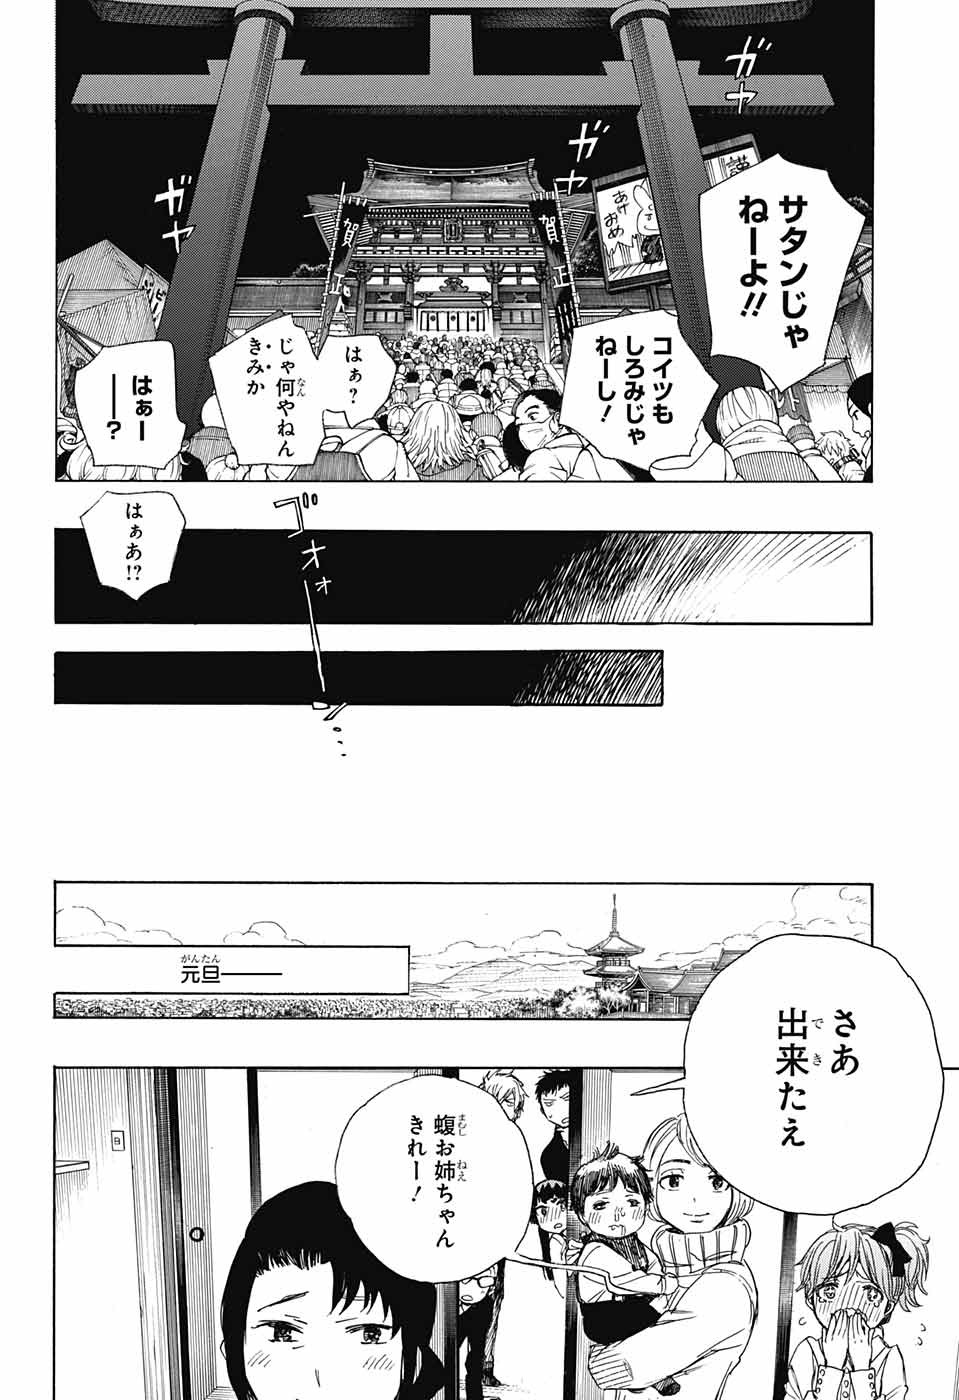 Ao no Exorcist - Chapter 90 - Page 34